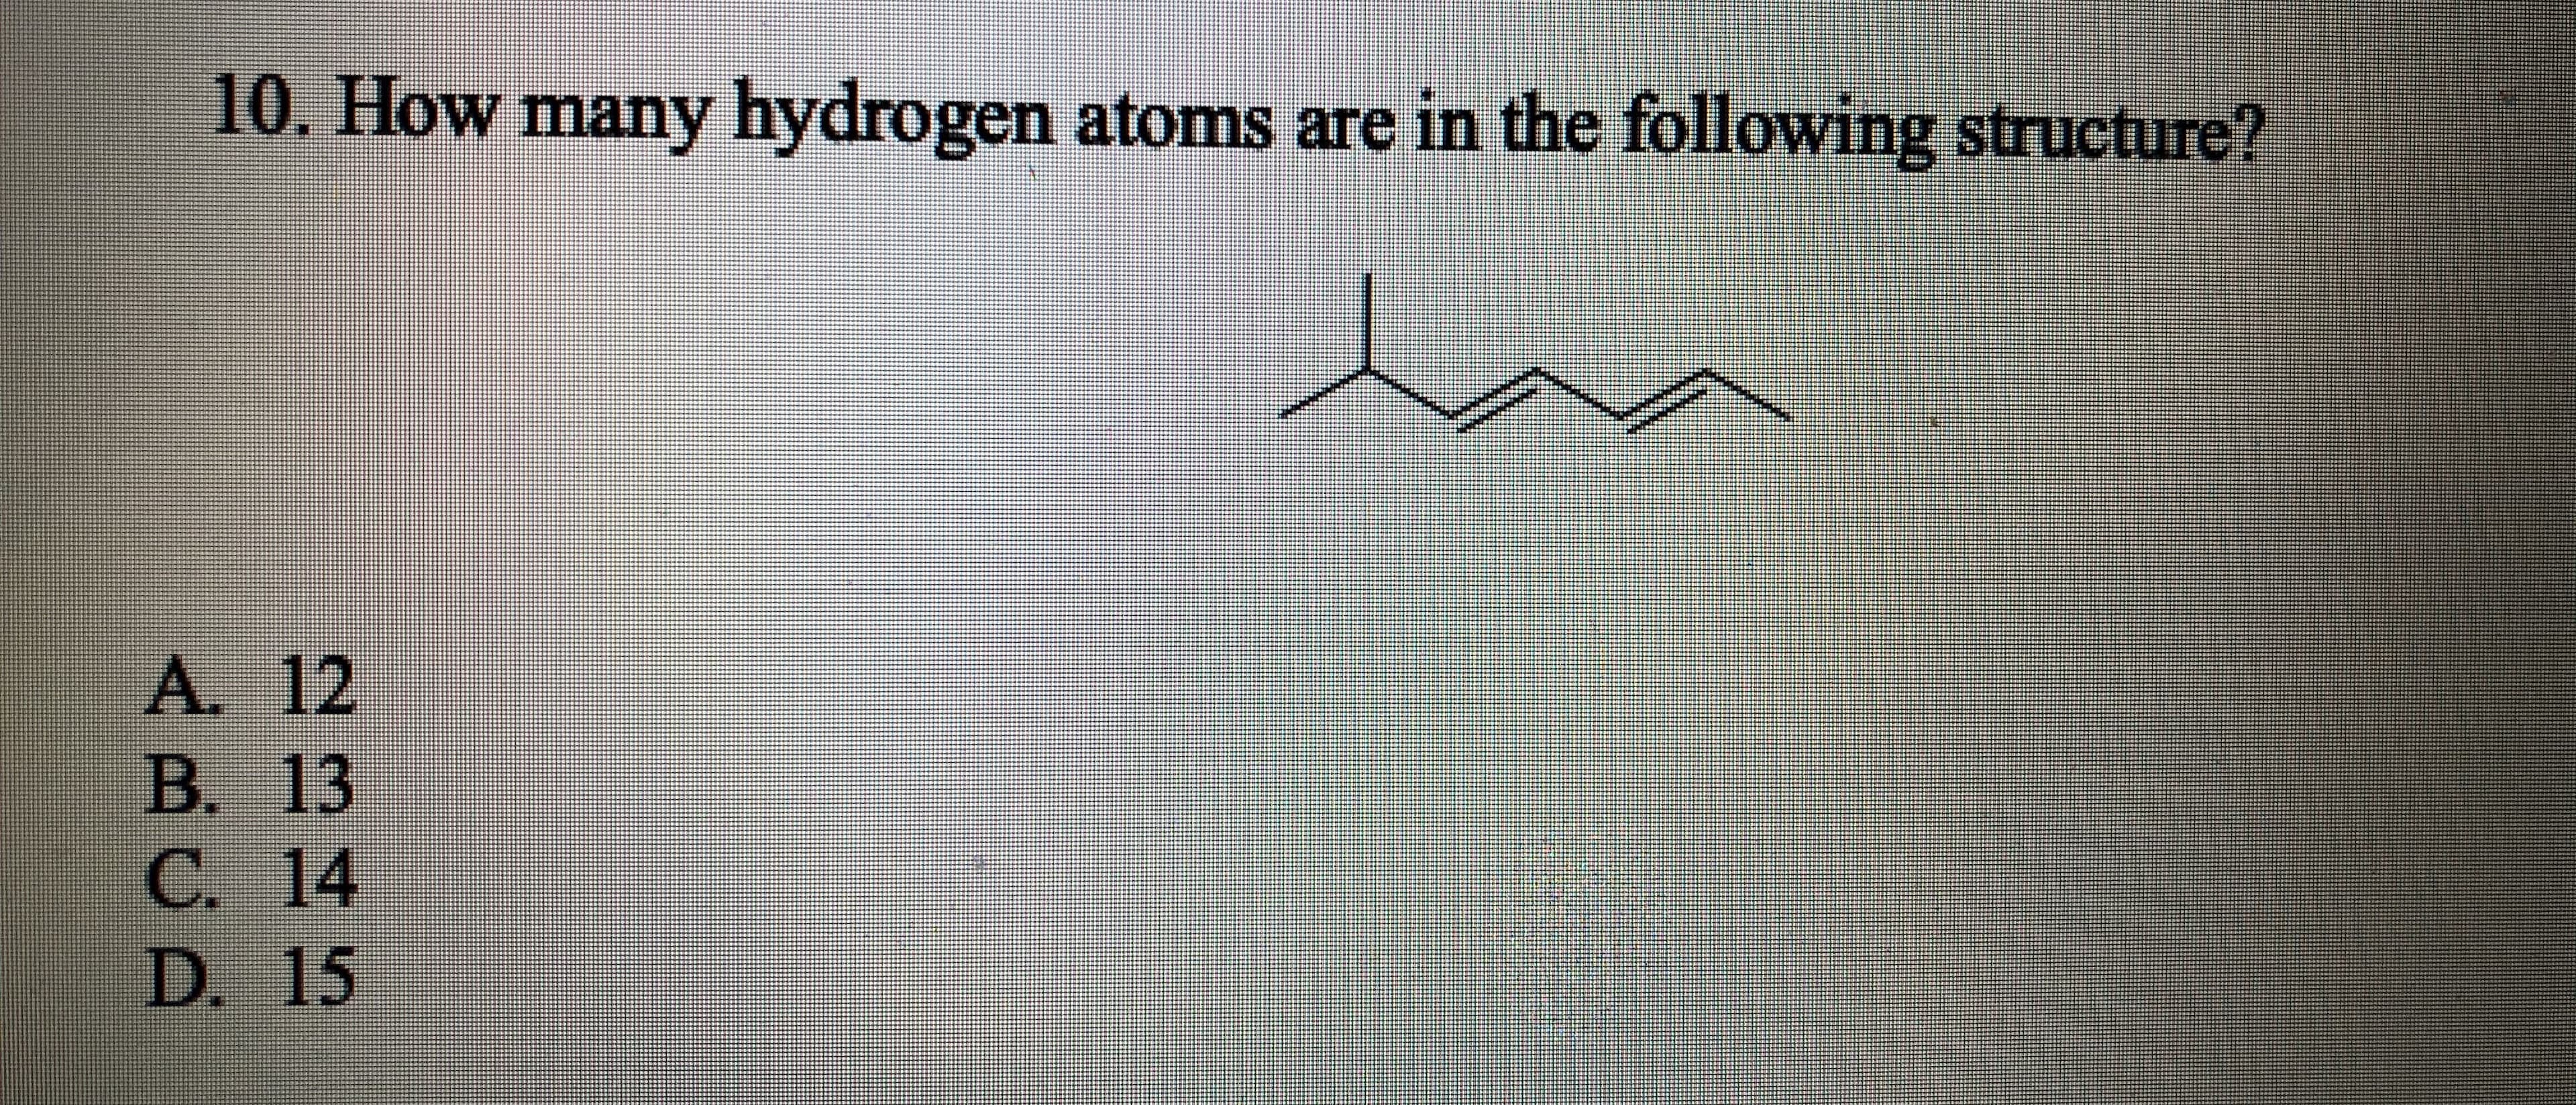 10. How many hydrogen atoms are in the following structure?
%
A. 12
B. 13
C. 14
D. 15
